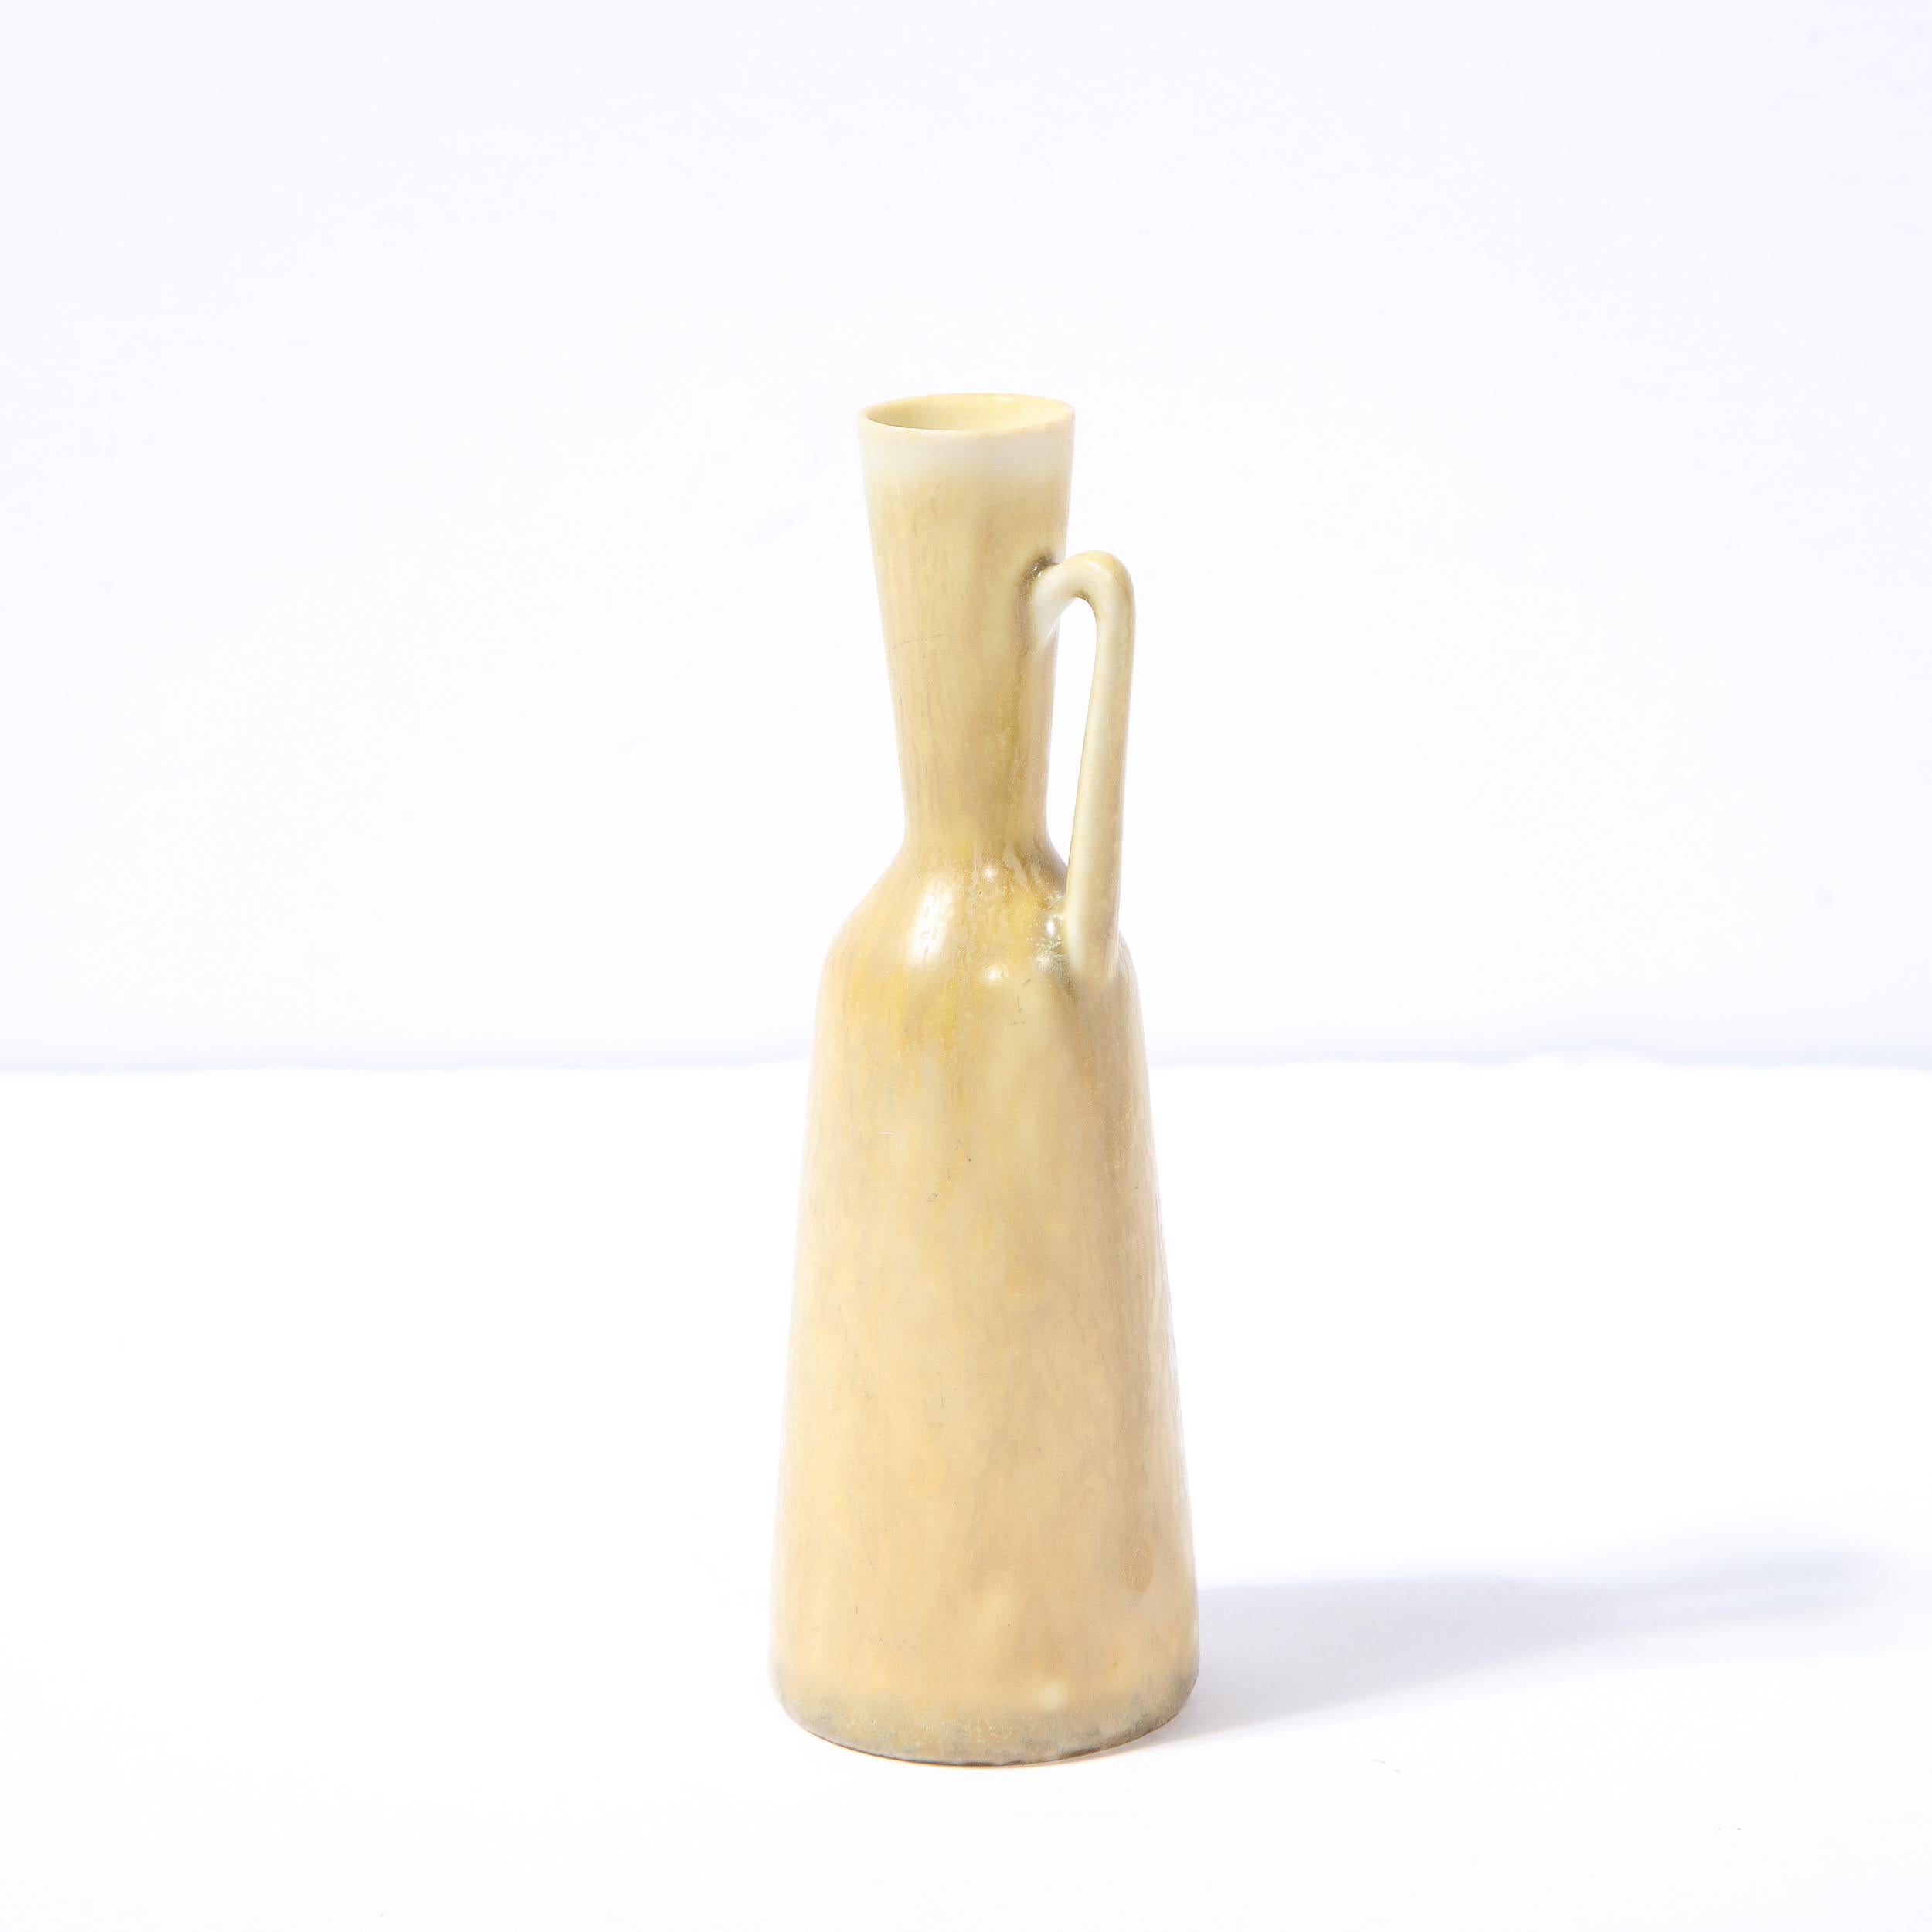 Mid-20th Century Swedish Mid-Century Modern Ceramic Vase Signed by Gunnar Nylund for Rorstrand For Sale